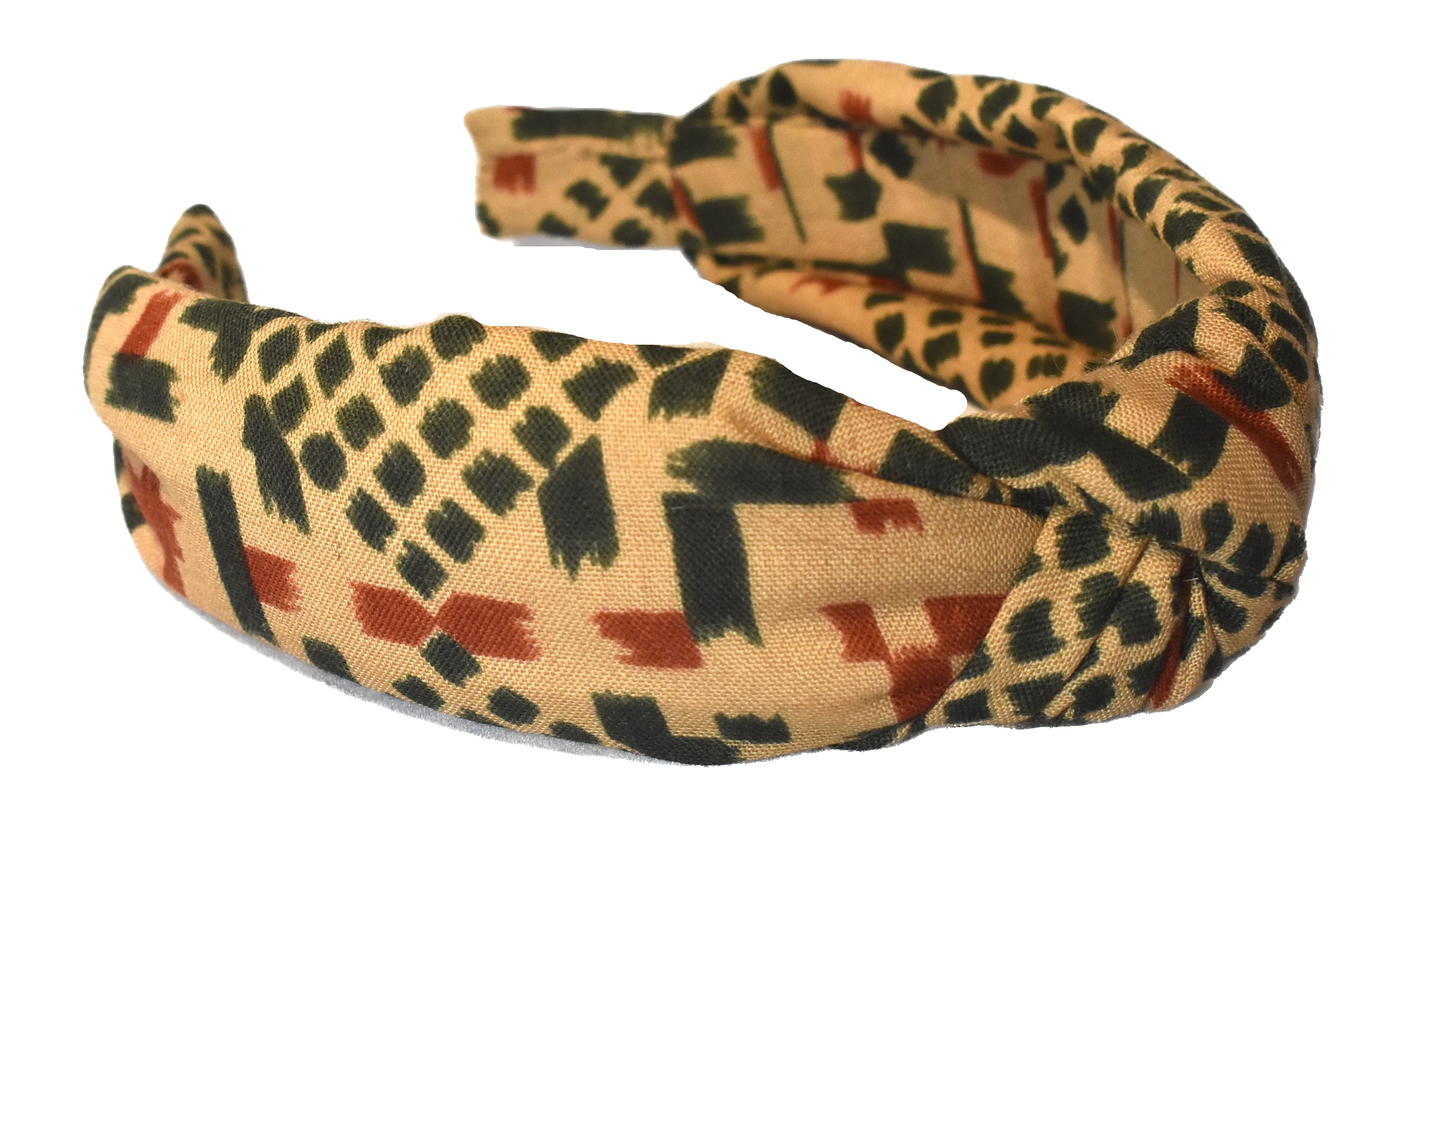 Tot Knot Alice band - Vintage Liberty of London Rust and Green Graphic in Varuna wool